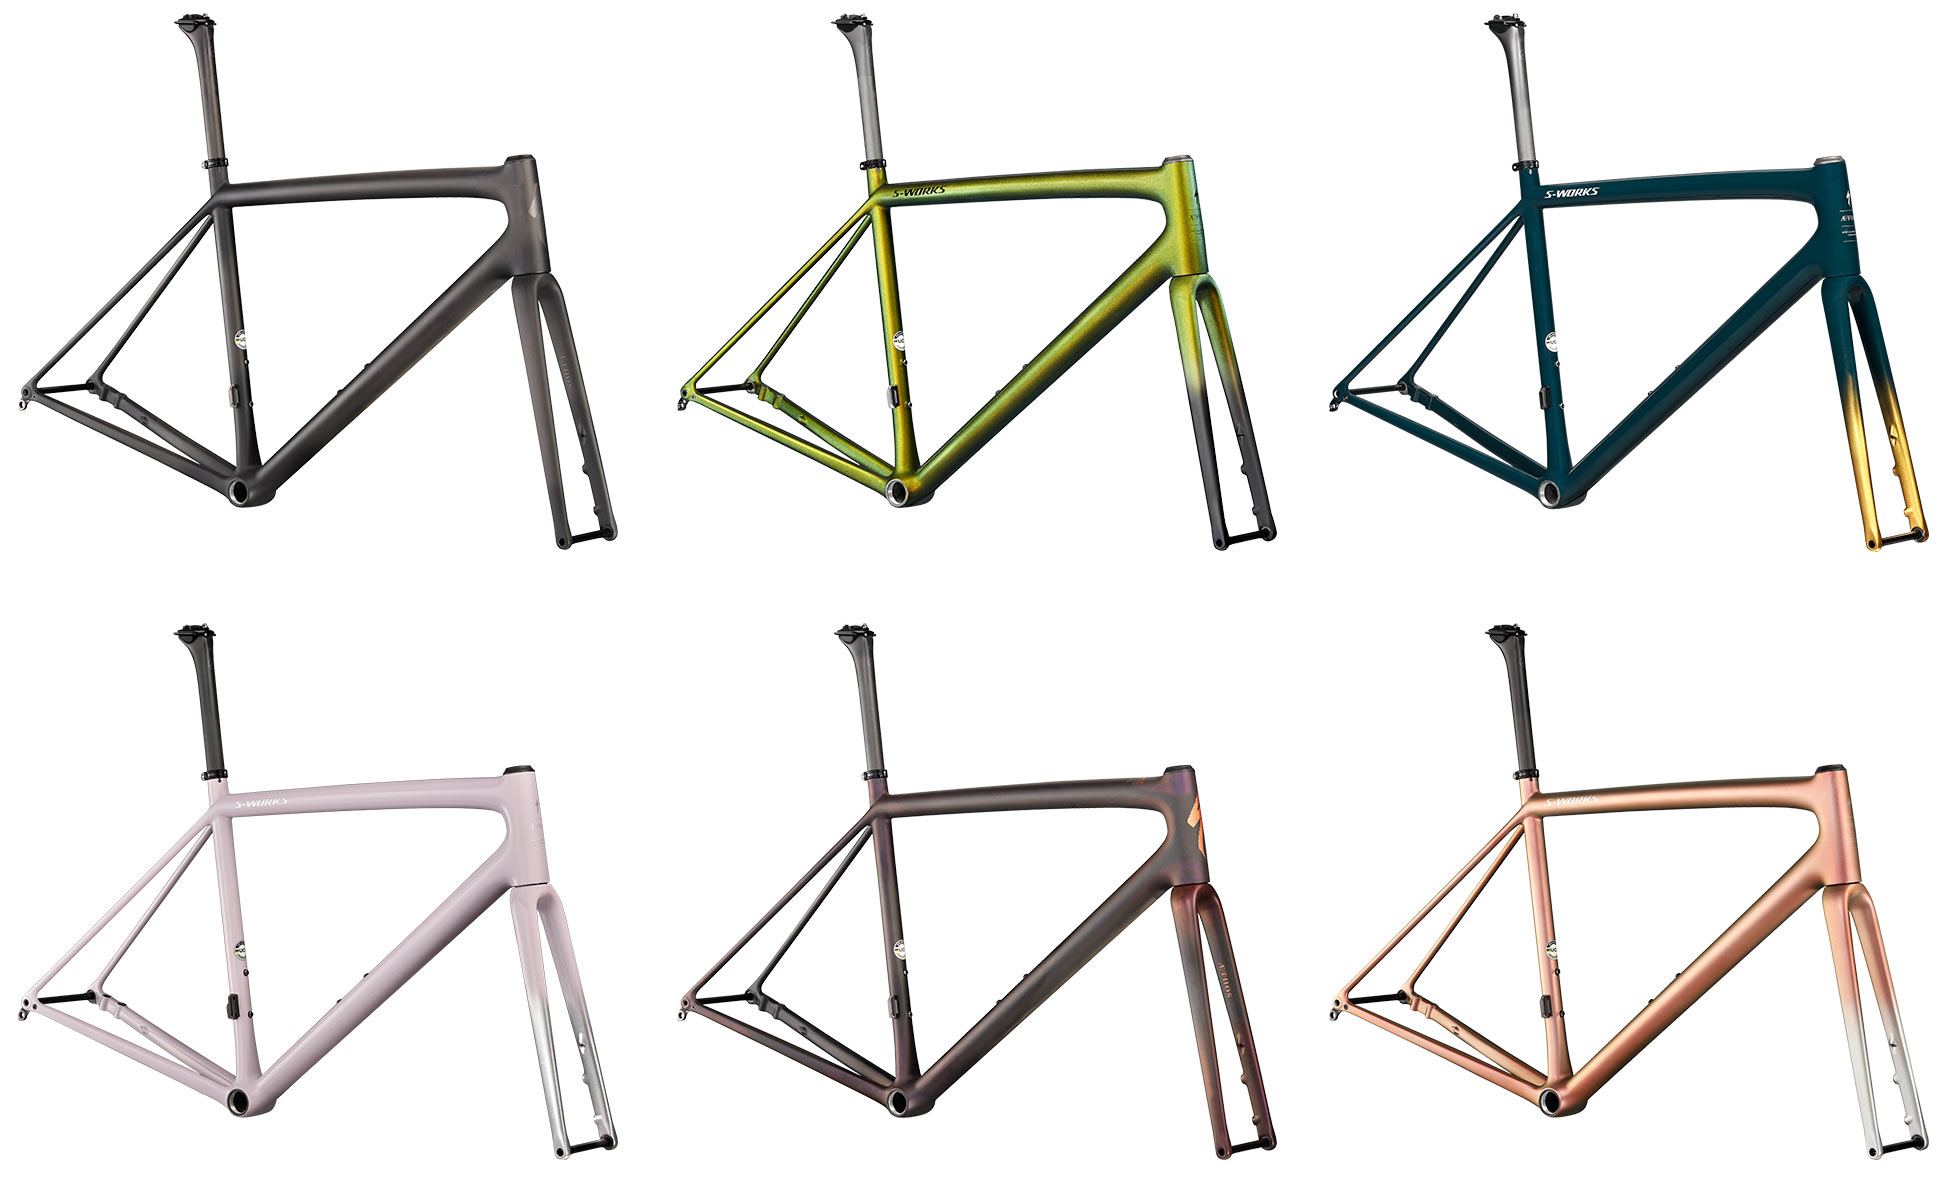 paint color options for the Specialized Aethos S-Works road bikes and framesets